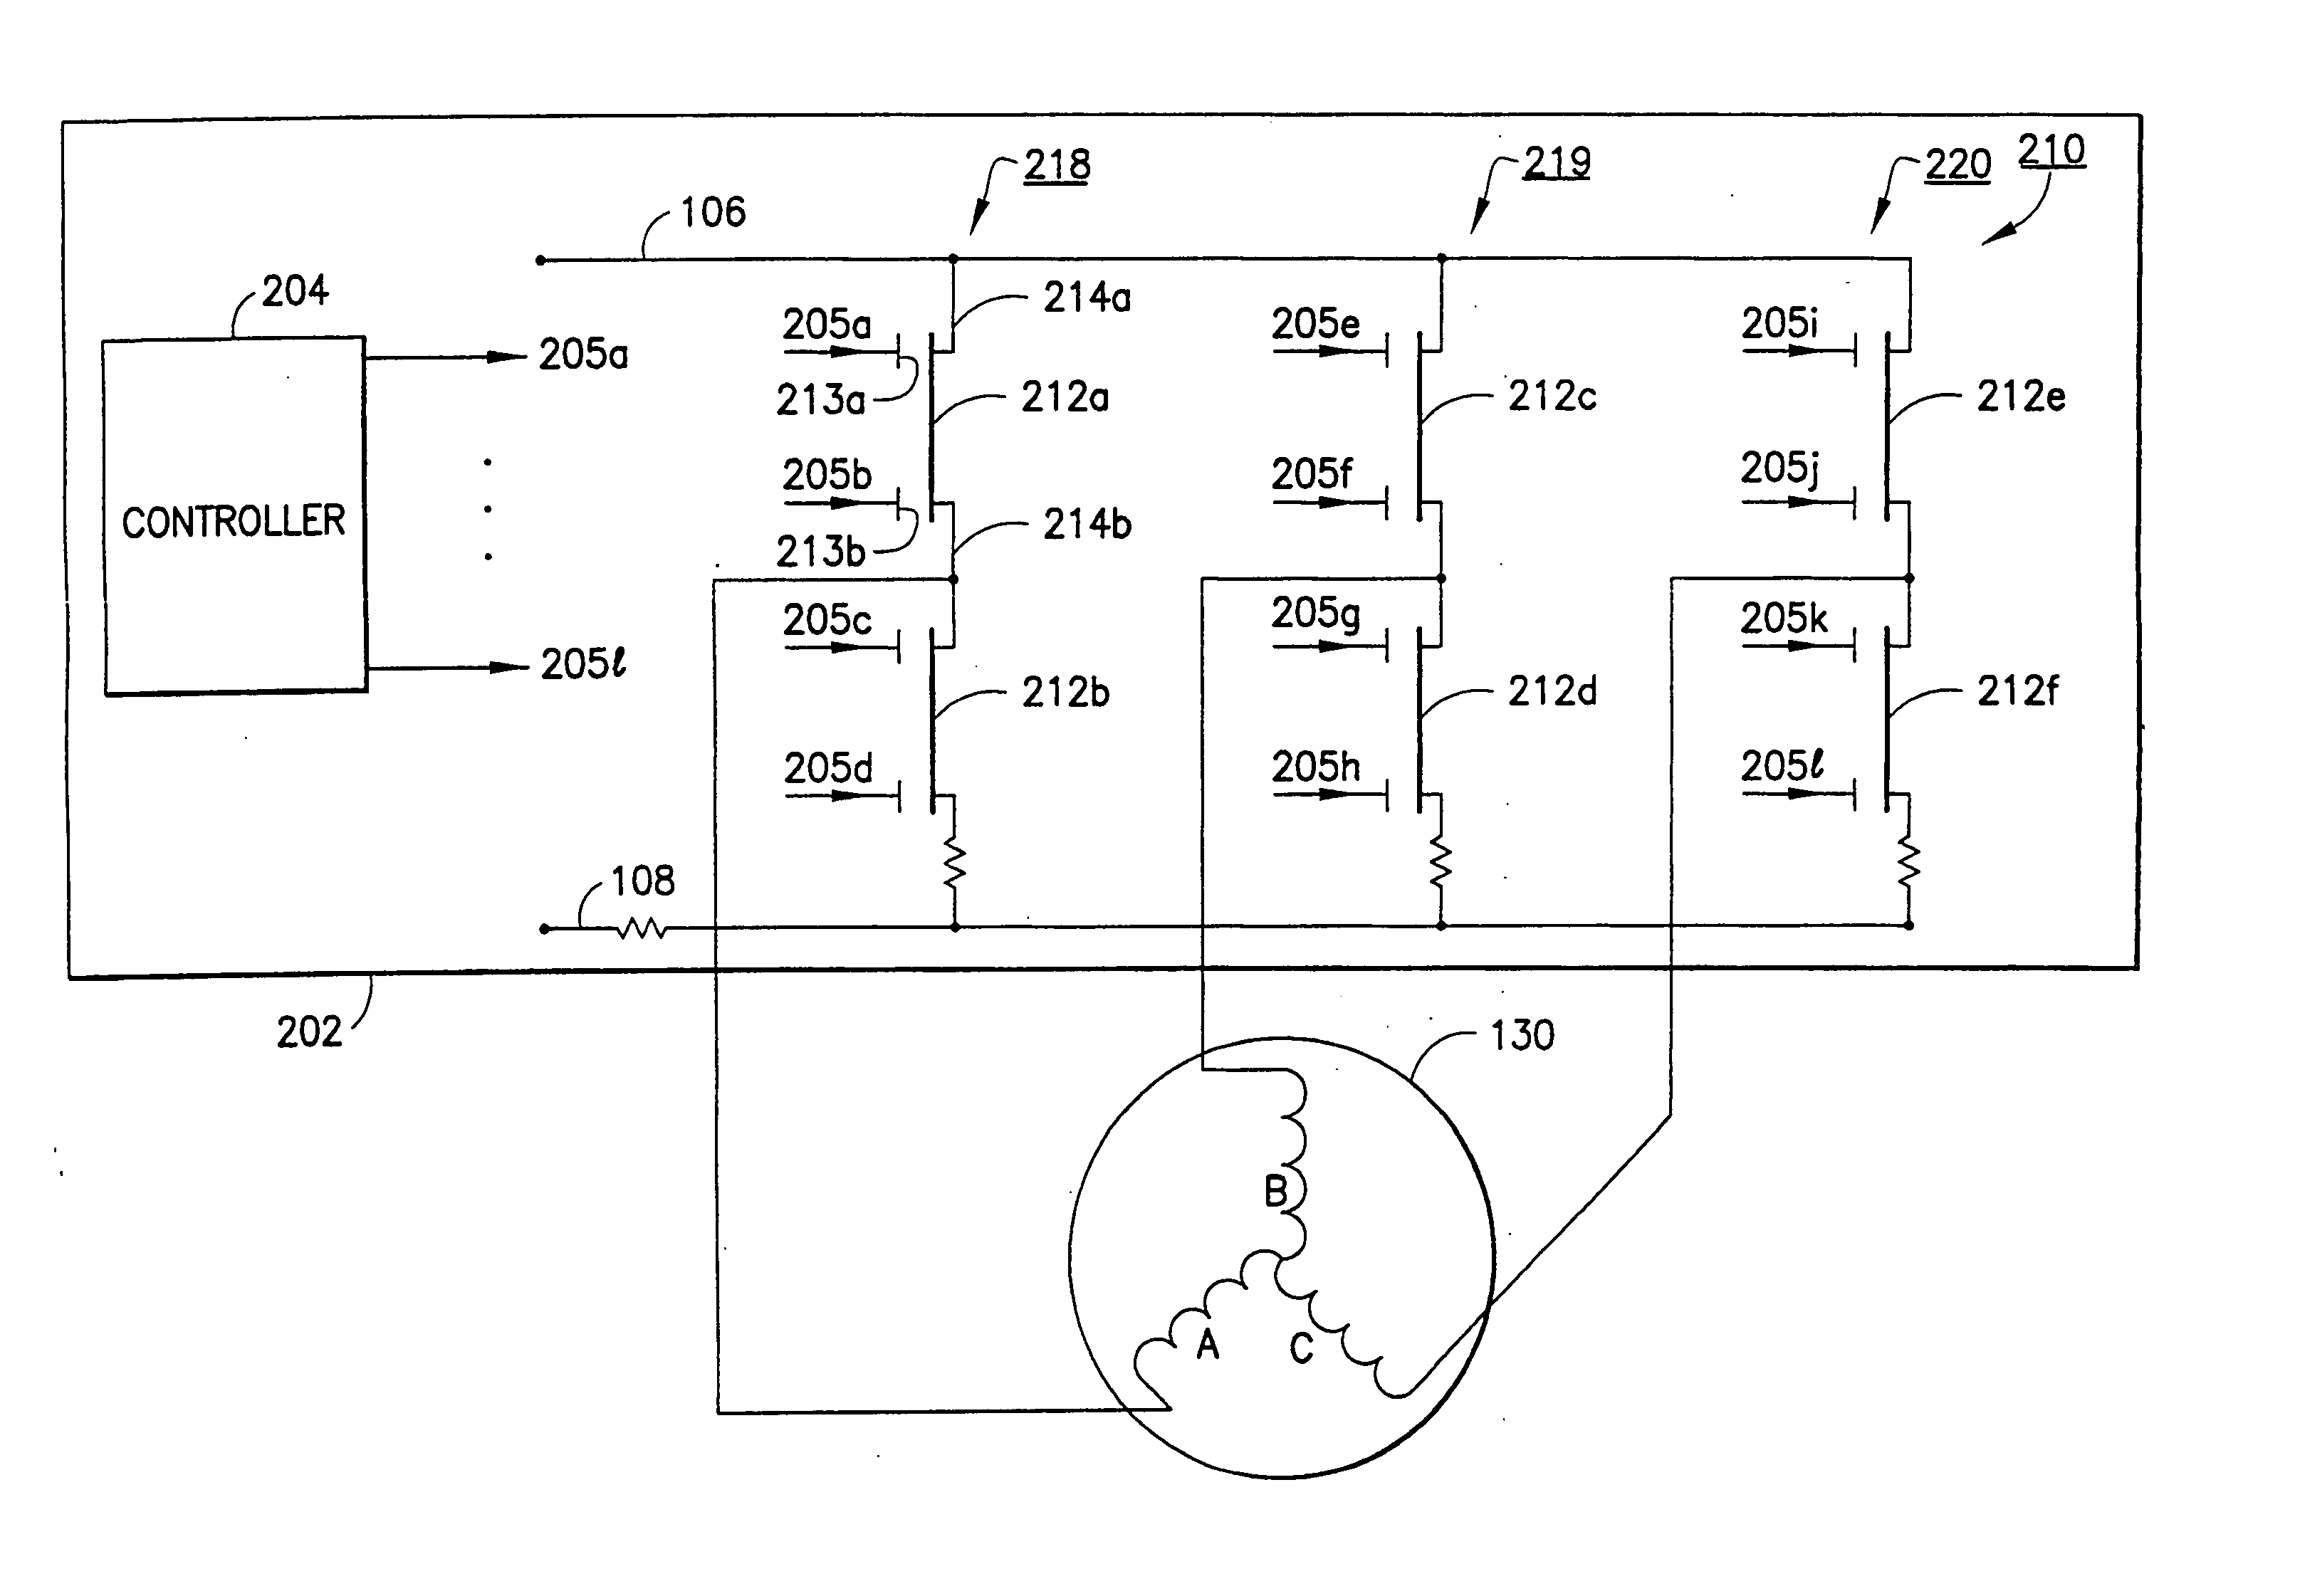 Motor drive inverter that includes III-nitride based power semiconductor devices